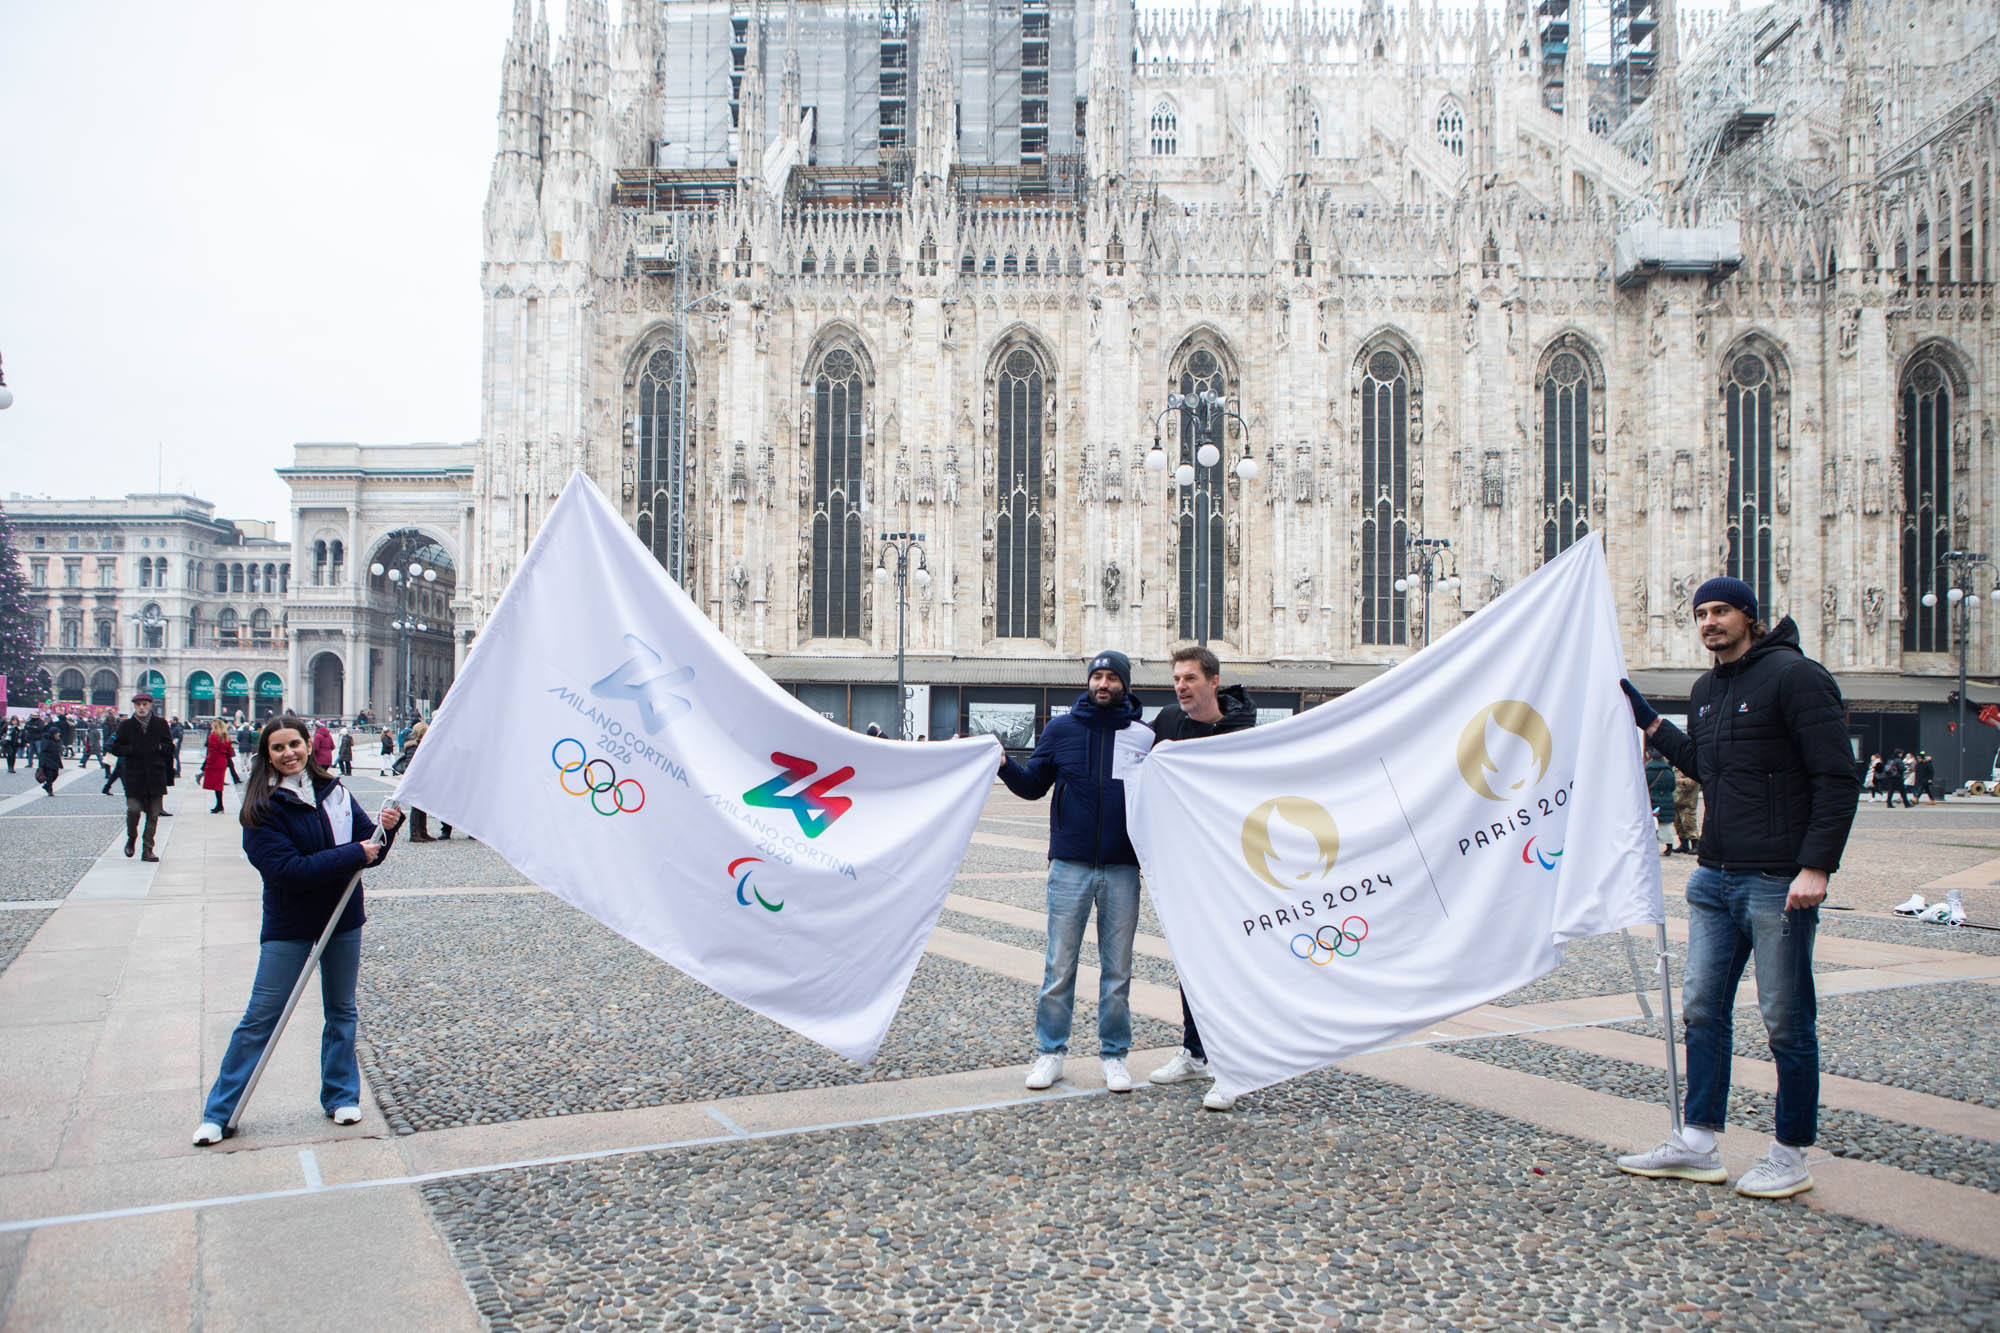 Milan Cortina 2026 hosts event with Paris 2024 to celebrate Olympics returning to Europe